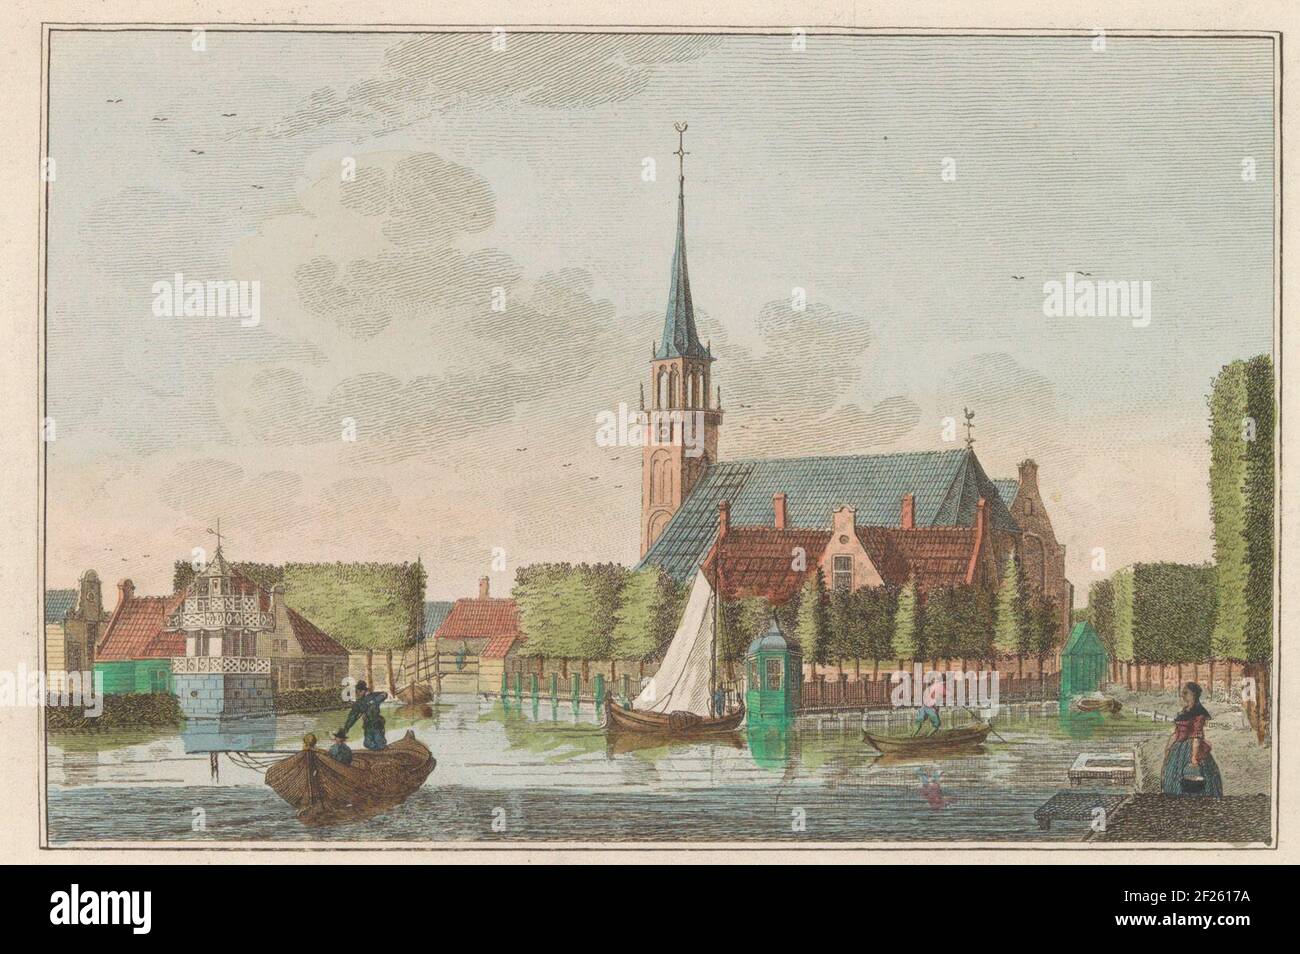 Broek in Waterland, ca. 1790; Broek over 't Havenrak te Zien / Village de Broek - prise vis à vis du Havenrak.View of the village of Broek in Waterland, seen over the water, approx. 1790. Part of a sheet metal from approx. 1824-1825 with 74 (unnumbered) plates of the most important topographic faces and several morals and habits in the United Kingdom of the Netherlands. Stock Photo